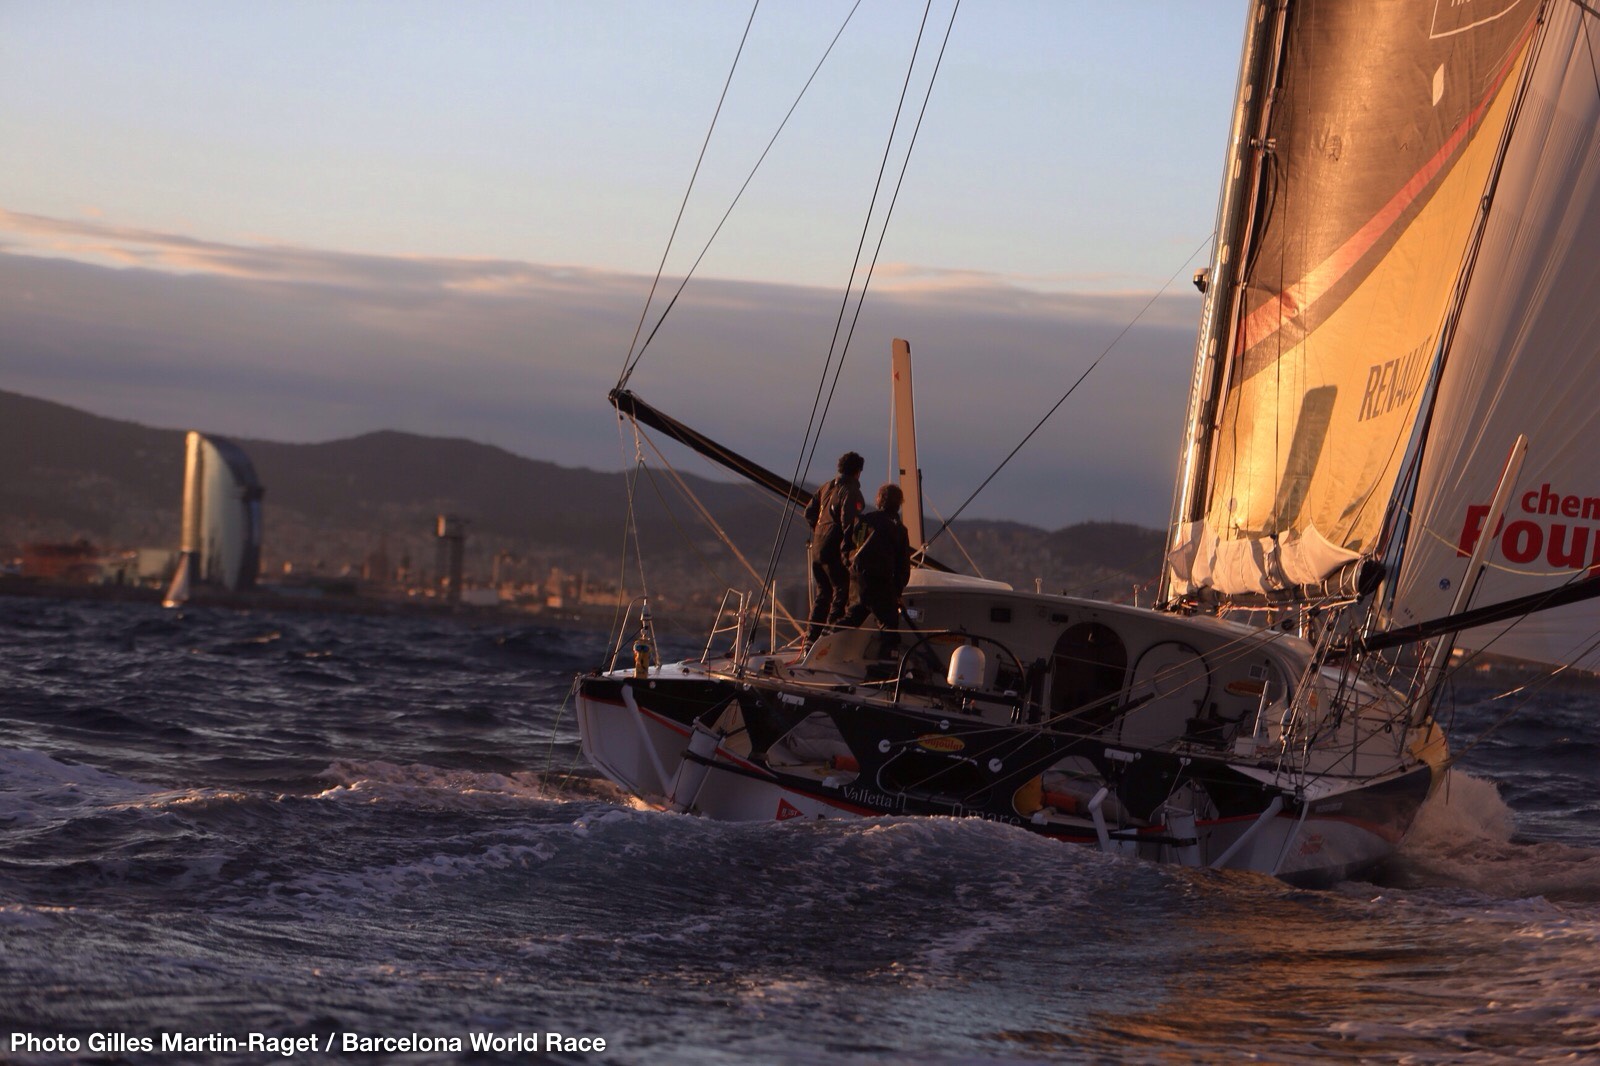 Bernard Stamm and Jean Le Cam are winners of the Barcelona World Race 2014-2015